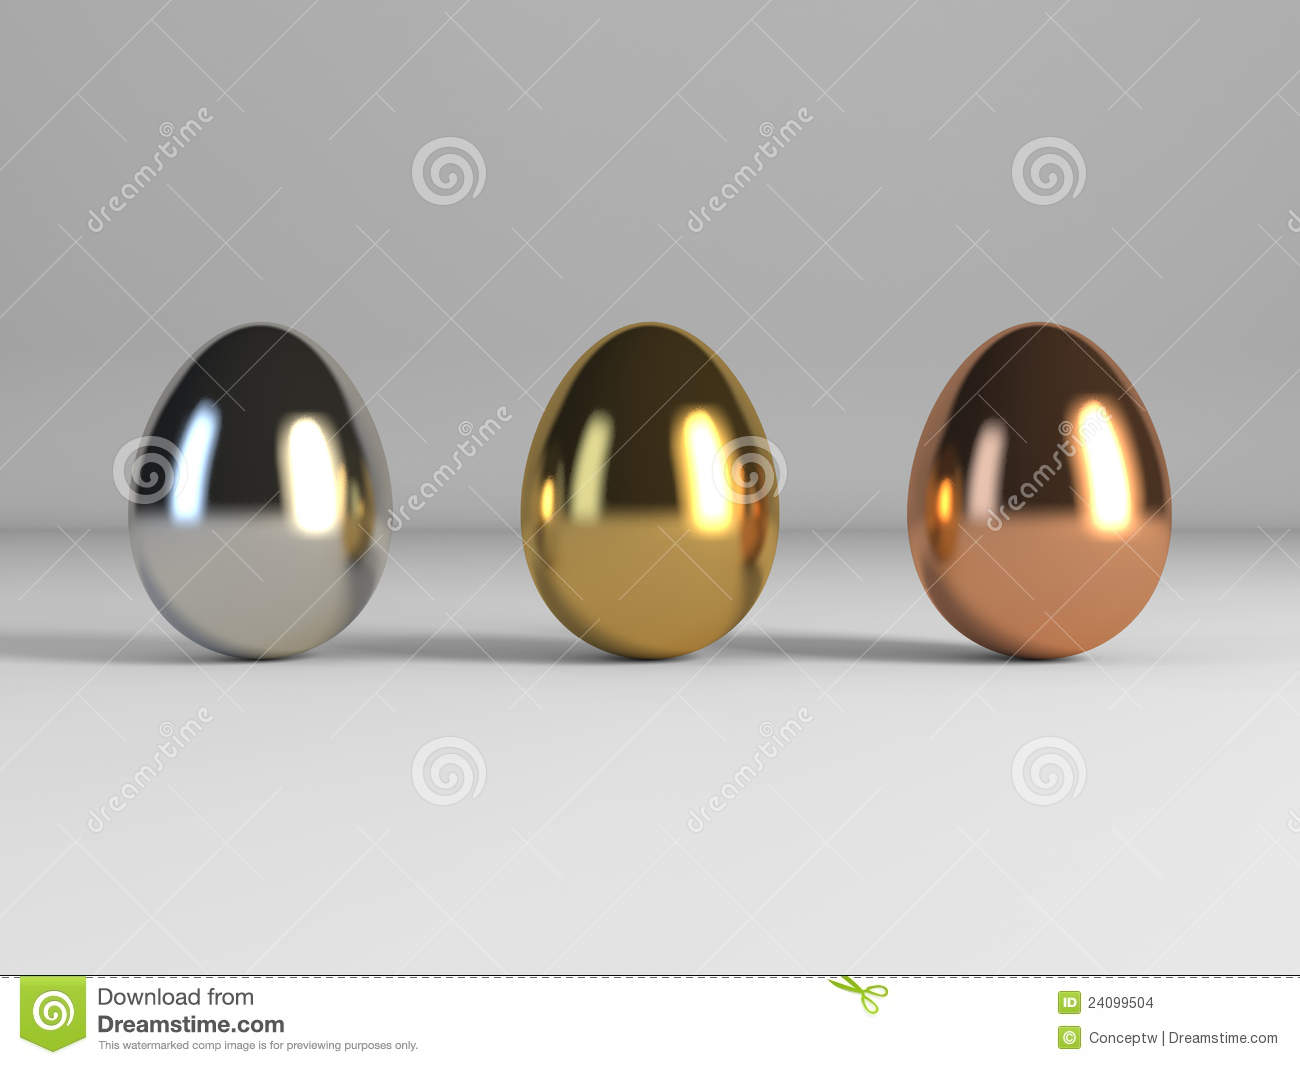 Easter Eggs With High Value Stock Images   Image  24099504